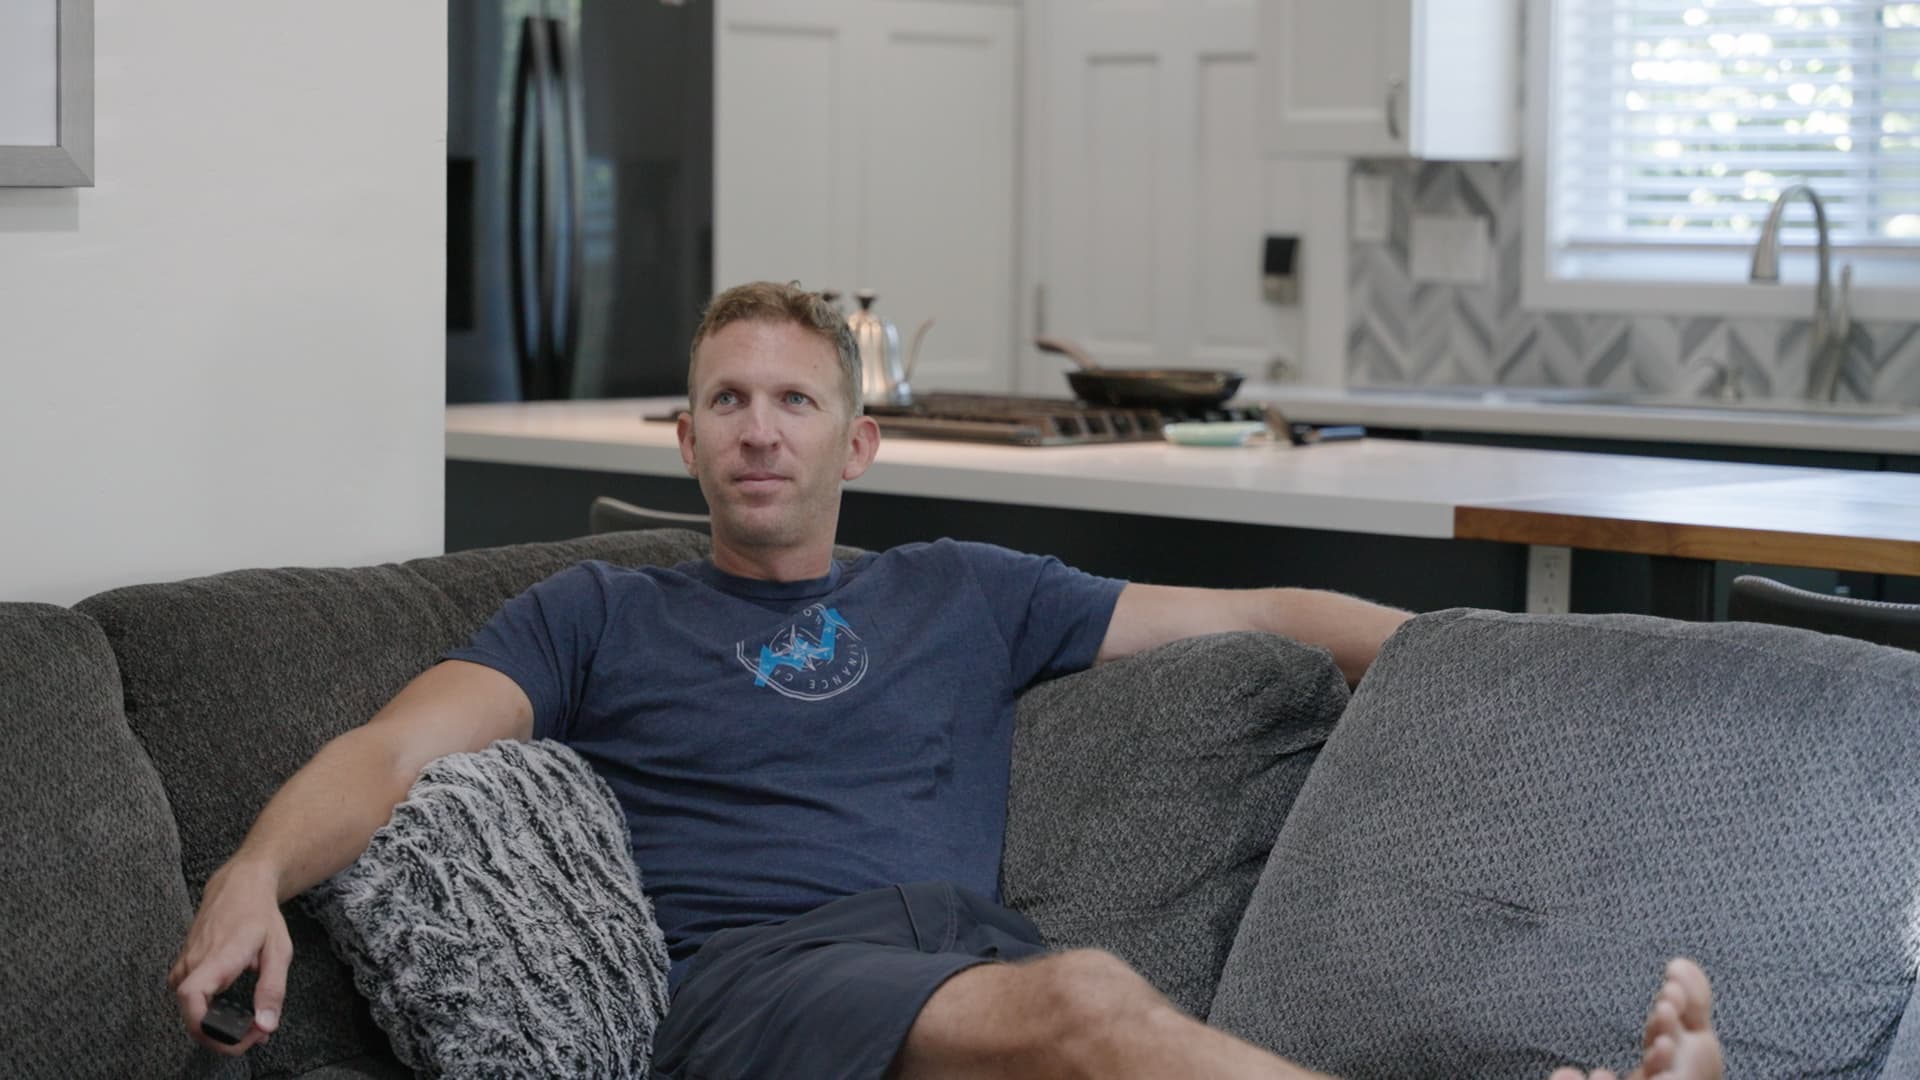 Today, 41-year-old Jeremy Schneider lives in San Diego, has a net worth of $4.4 million and runs a small business selling financial literacy courses online.